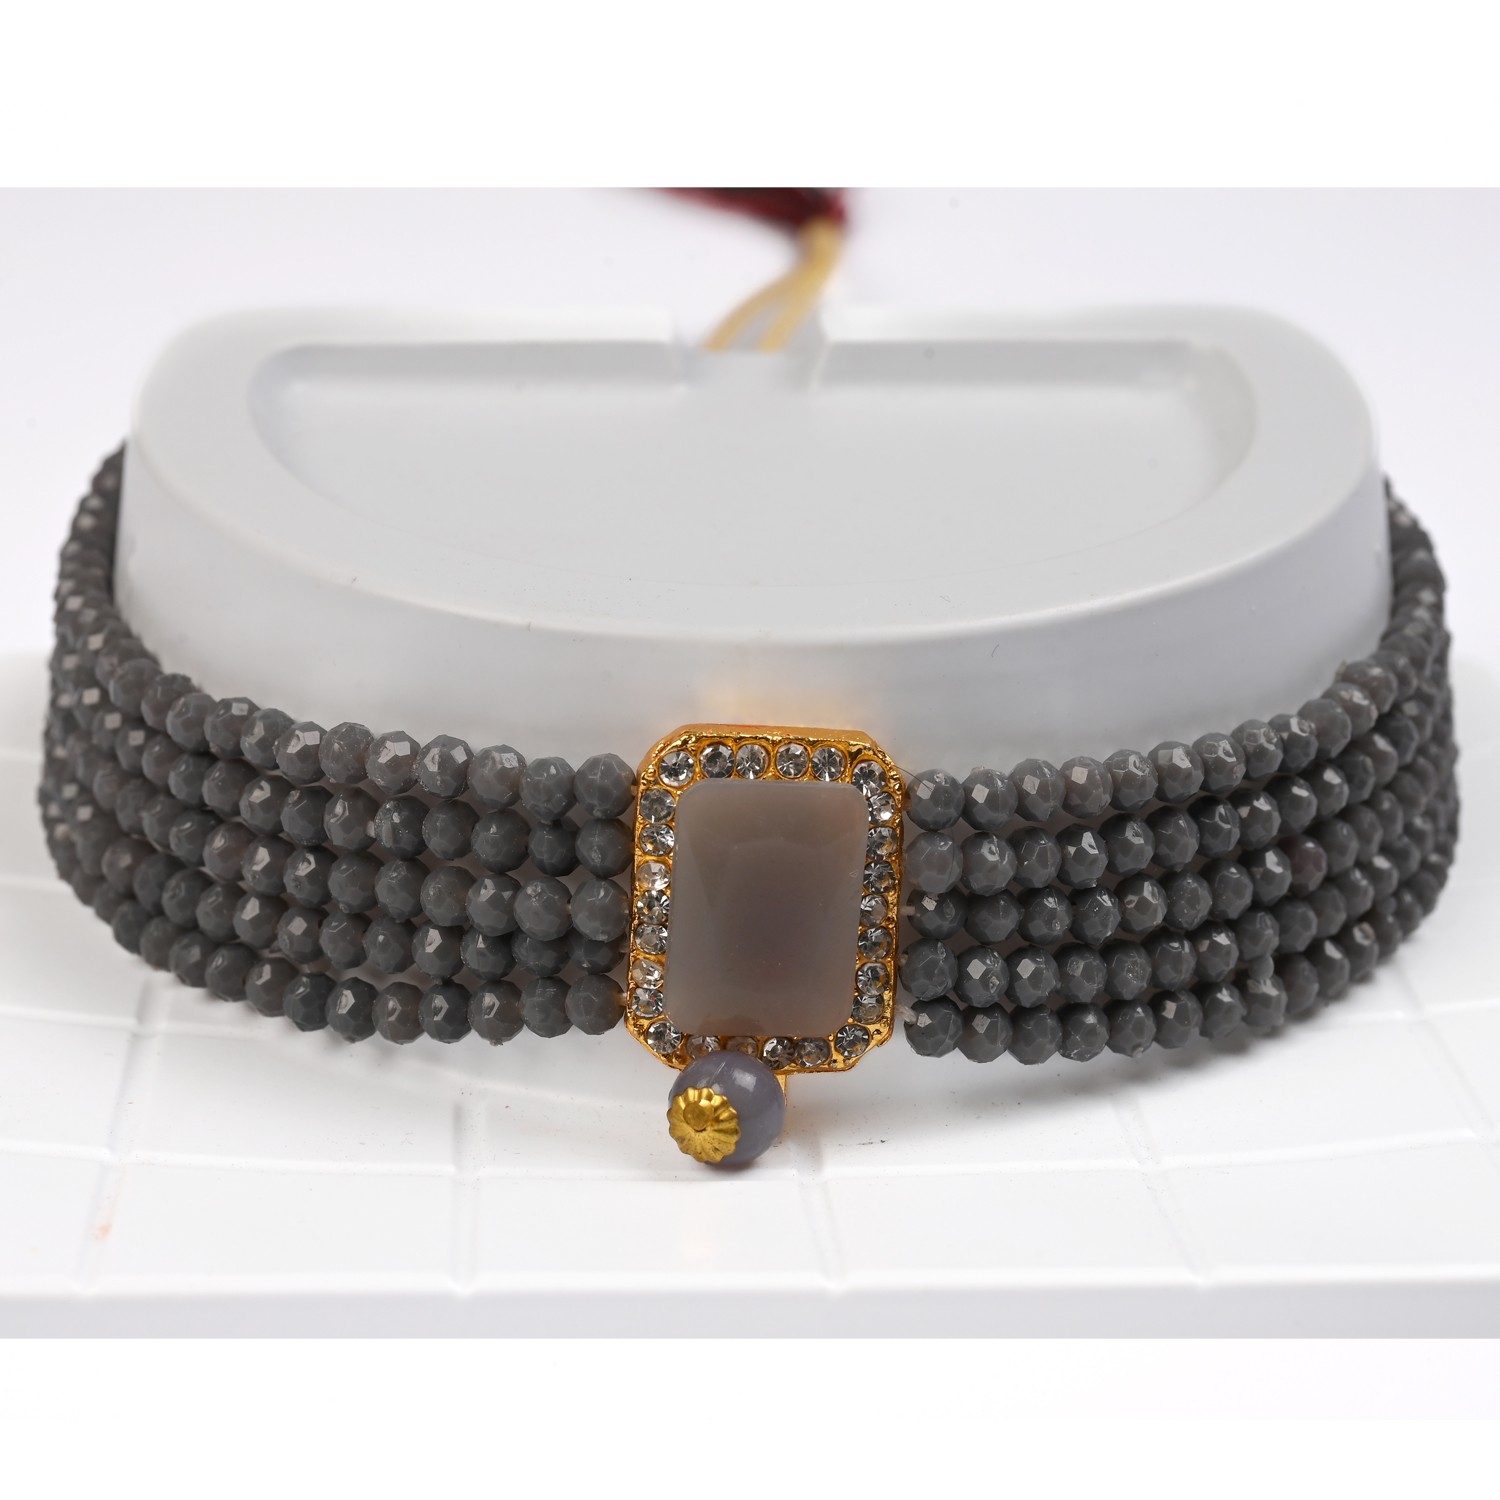 Choker Set for Women - Elegant and Versatile Necklaces for Every Occasion